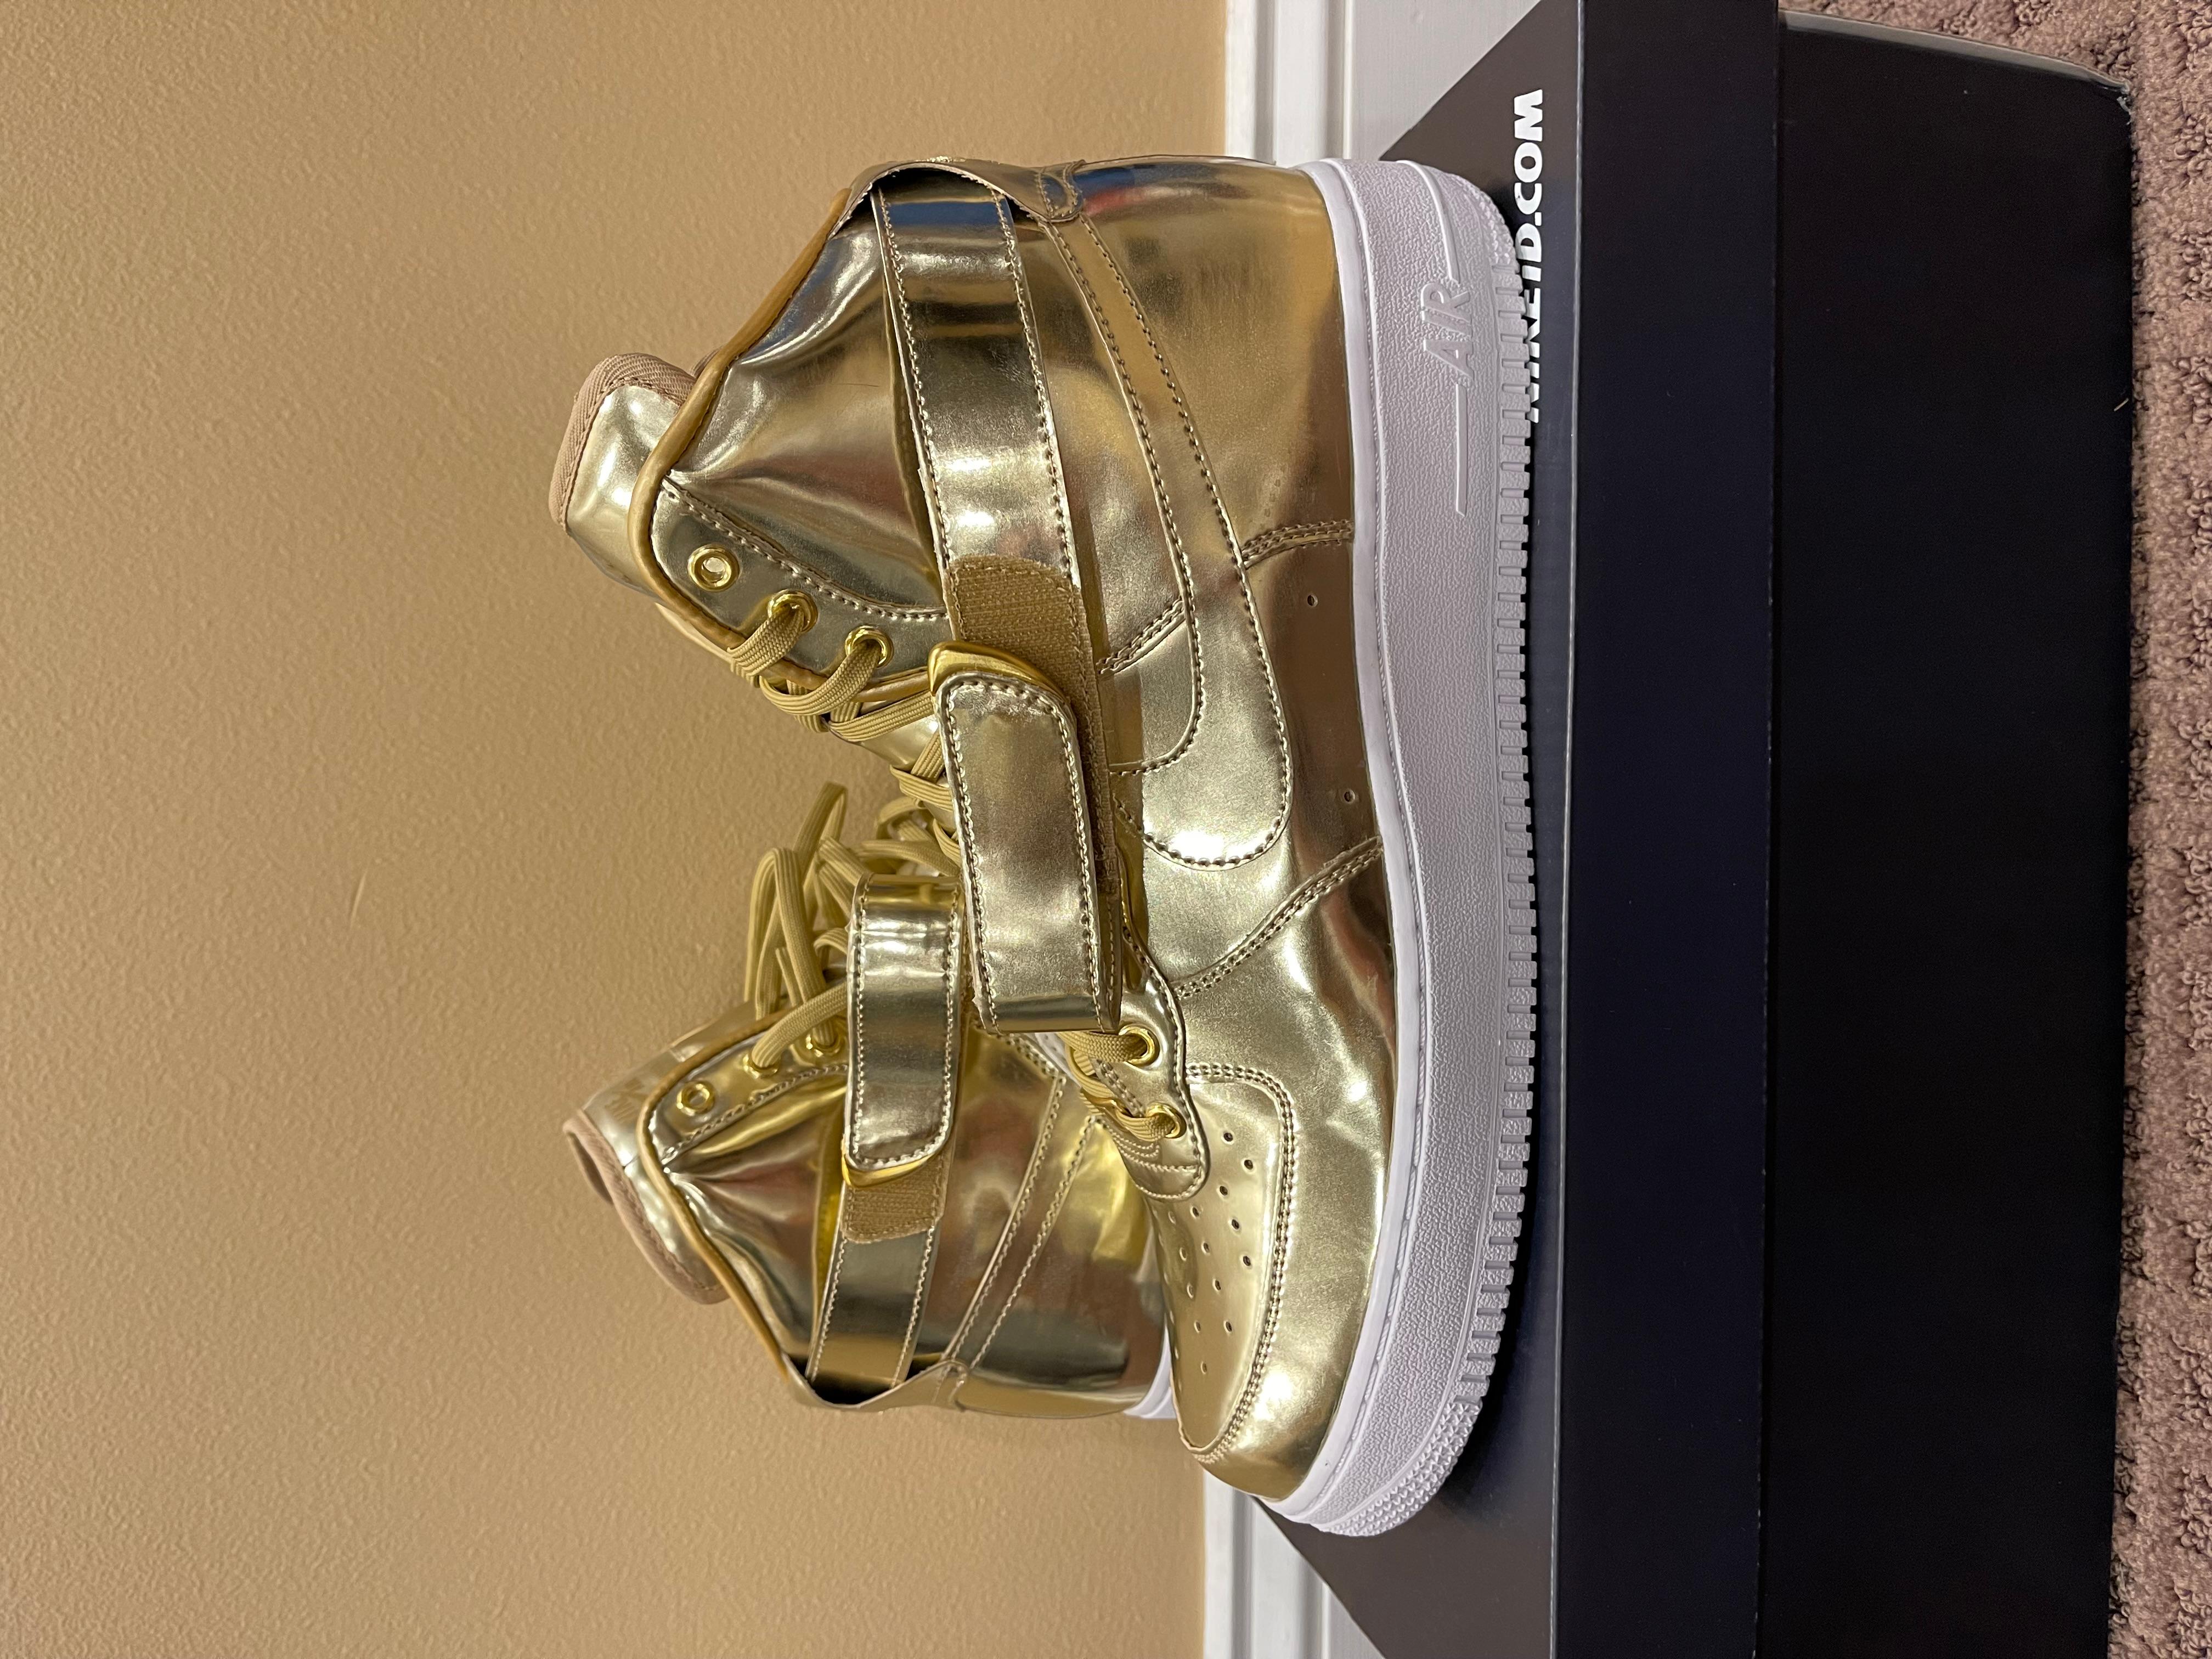 Nike ID Air Force 1 Gold Metallic Highs
Size 10.5
Comes with nike ID Box
Excellent condition (besides the bottoms, could pass as new)

This model is not coming back for nike id, extremely rare

All sales are final.